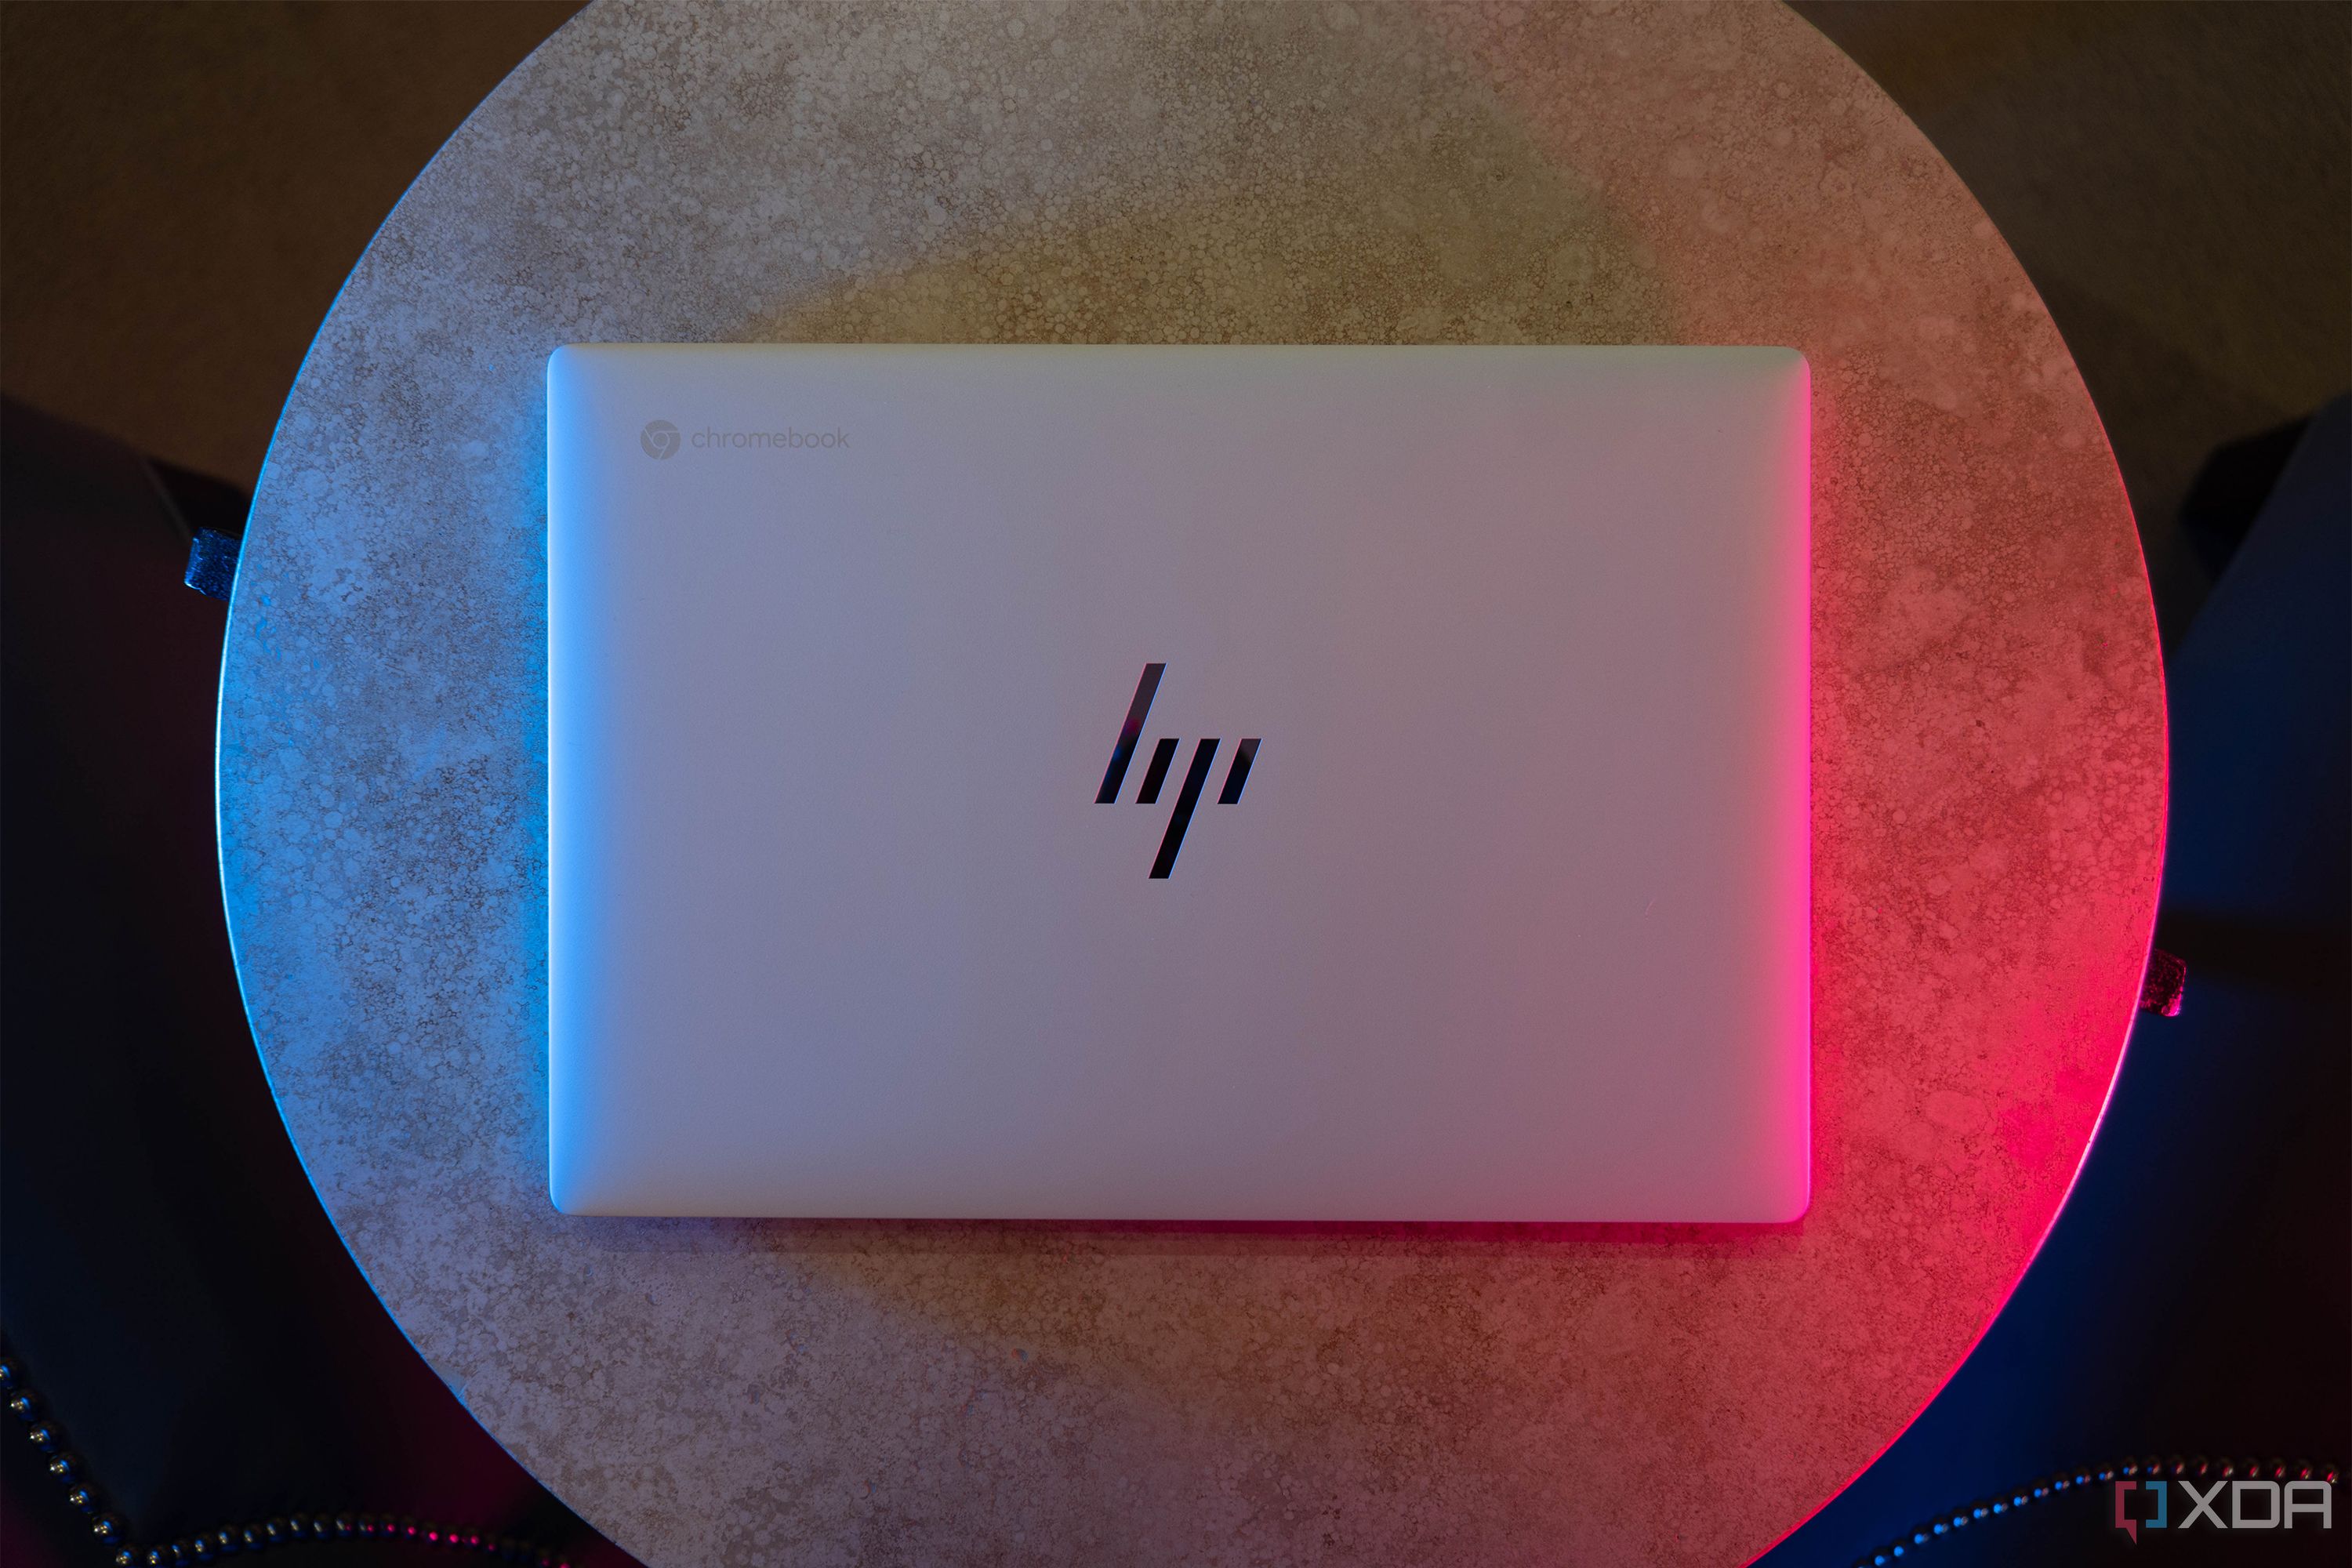 Top down view of white HP laptop with blue and pink lighting